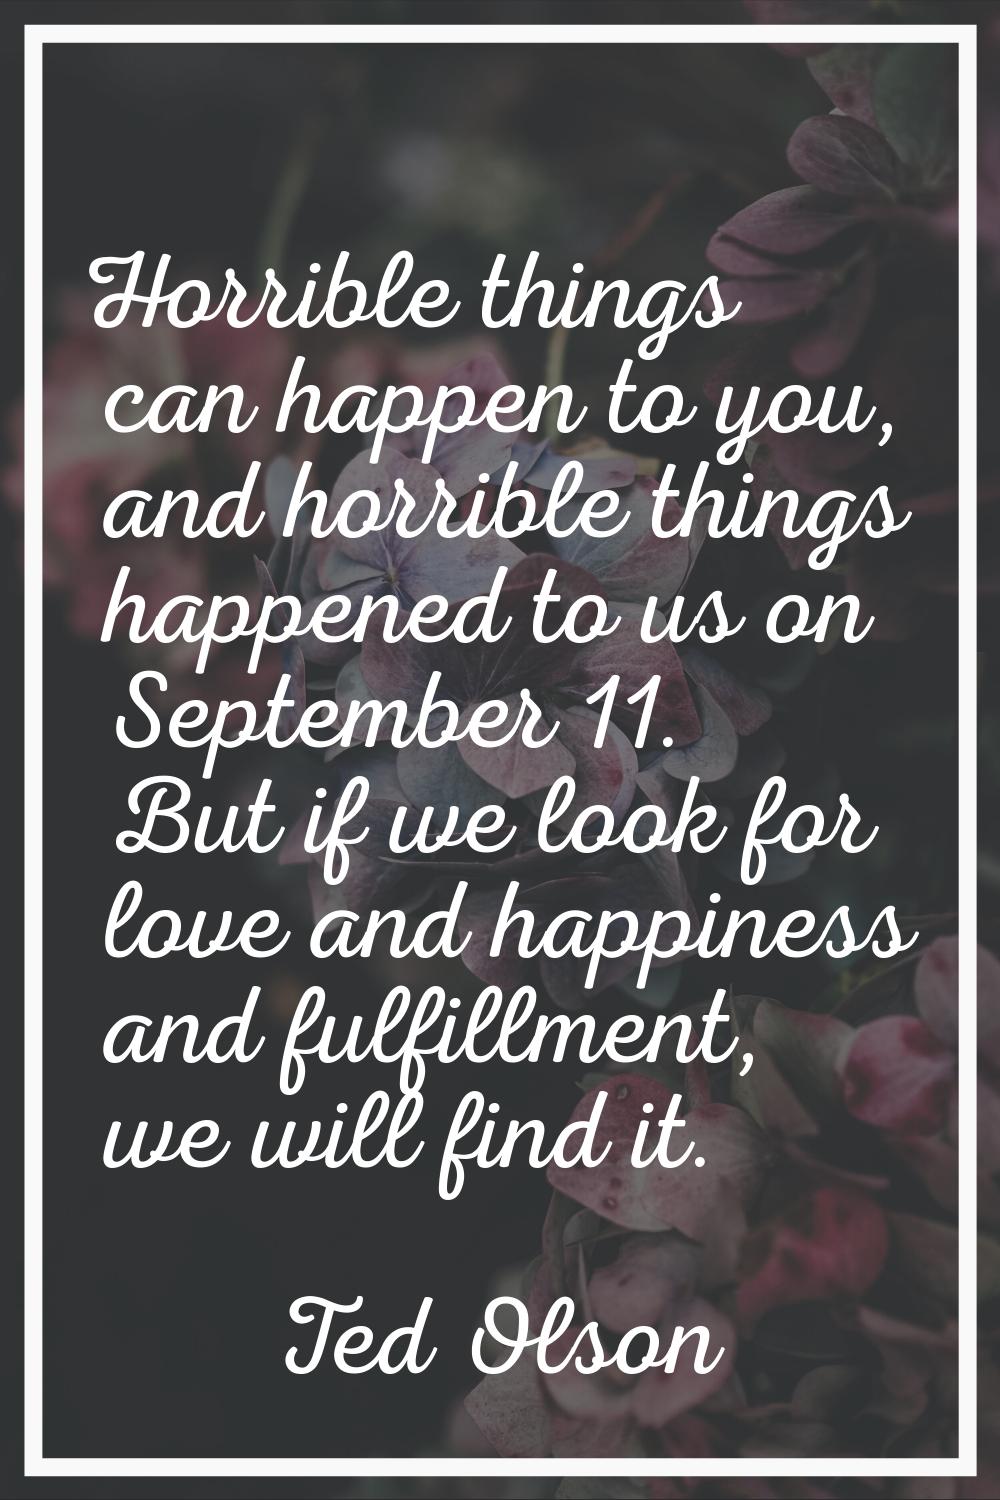 Horrible things can happen to you, and horrible things happened to us on September 11. But if we lo